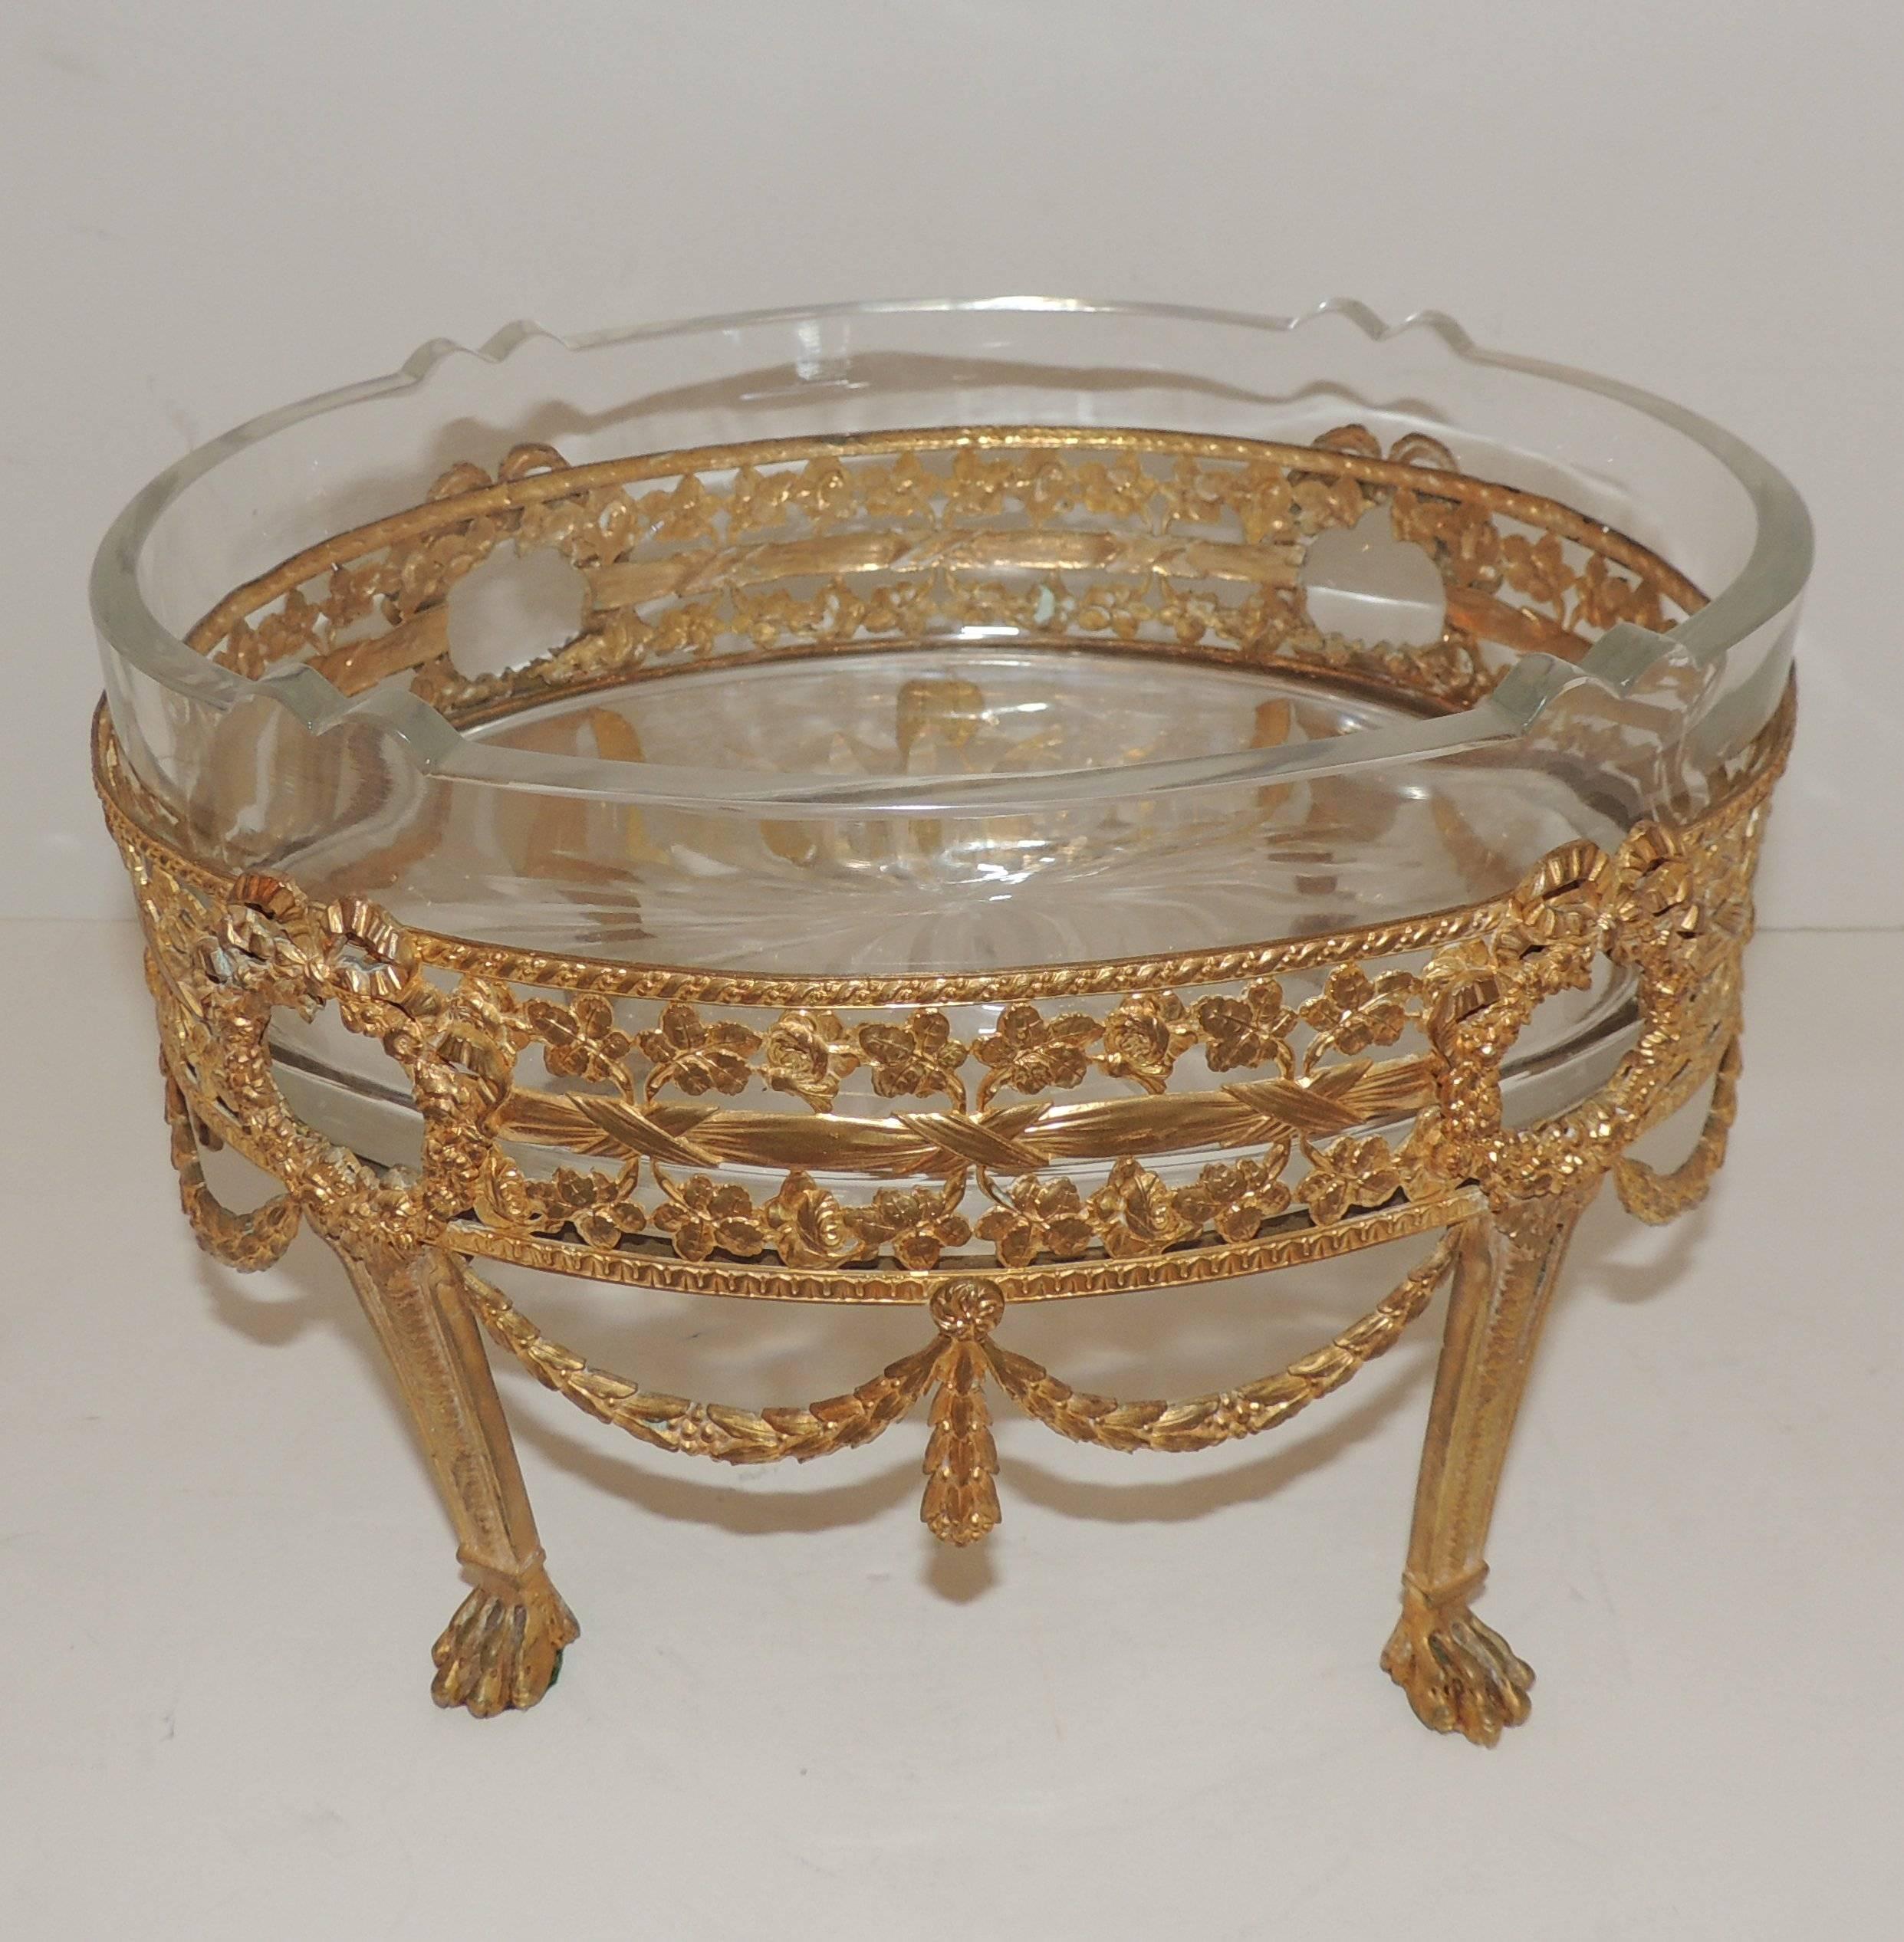 Wonderful French doré bronze bow and swag footed centerpiece with crystal insert with scalloped accents on four corners.

Measures: 10" W x 7" H x 7" D.

 